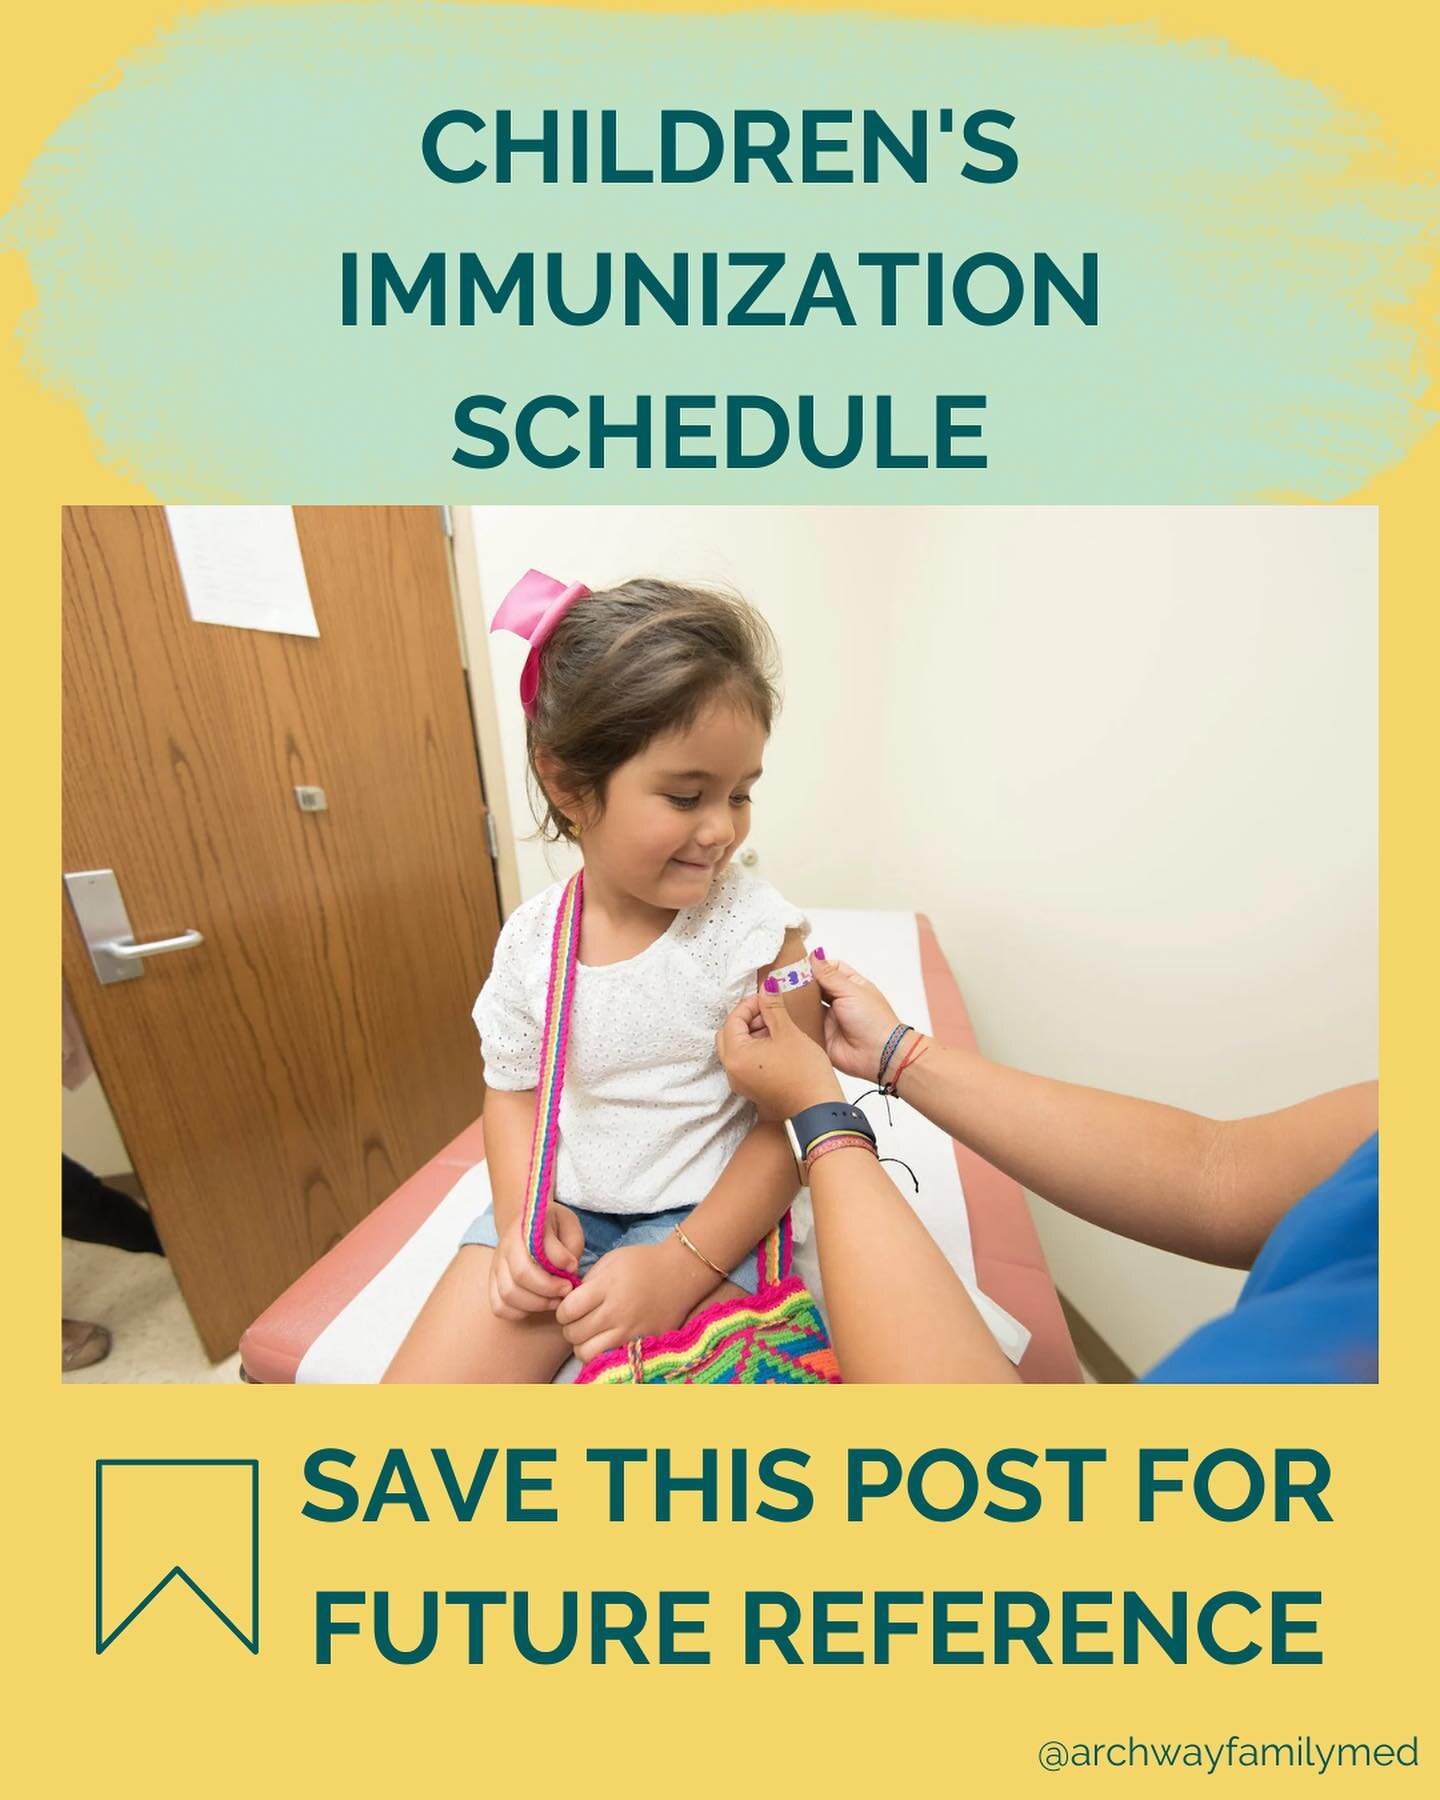 Protecting your child&rsquo;s health starts with a simple step- save a copy of the vaccine schedule and never miss a well child visit again! 

Don&rsquo;t forget, schools require certain vaccines for enrollment. Ensure your child is up to date on the